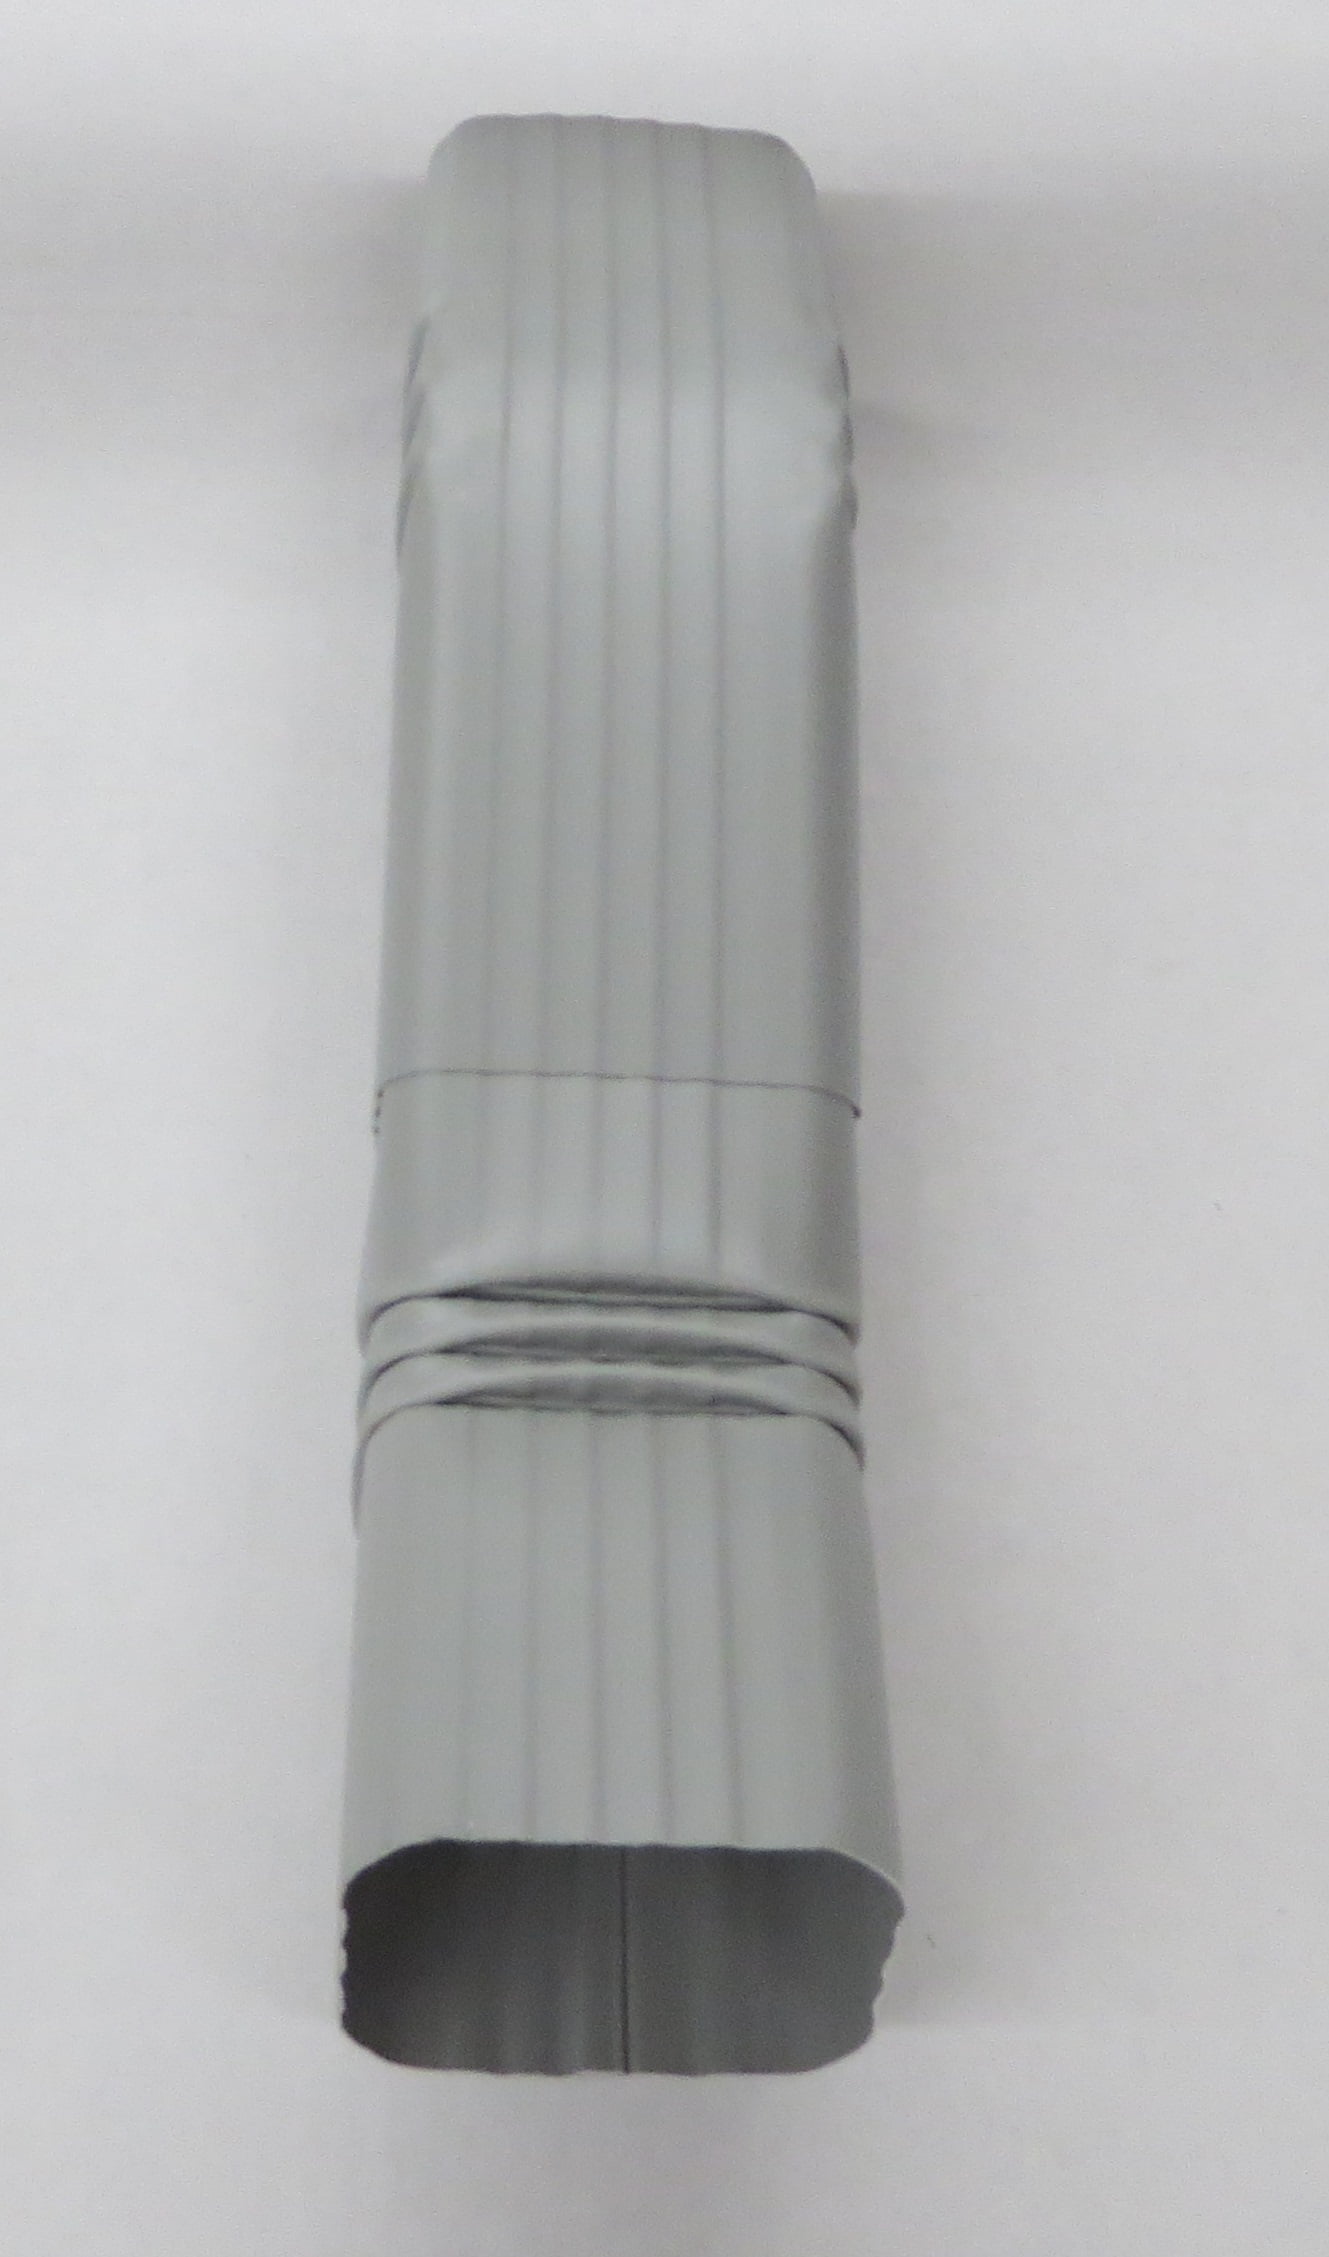 90 Degree Aluminum Downspout Gutter Elbow Style B 3x4 Inches, Pearl Gray 2x3 inches or 3x4 inches